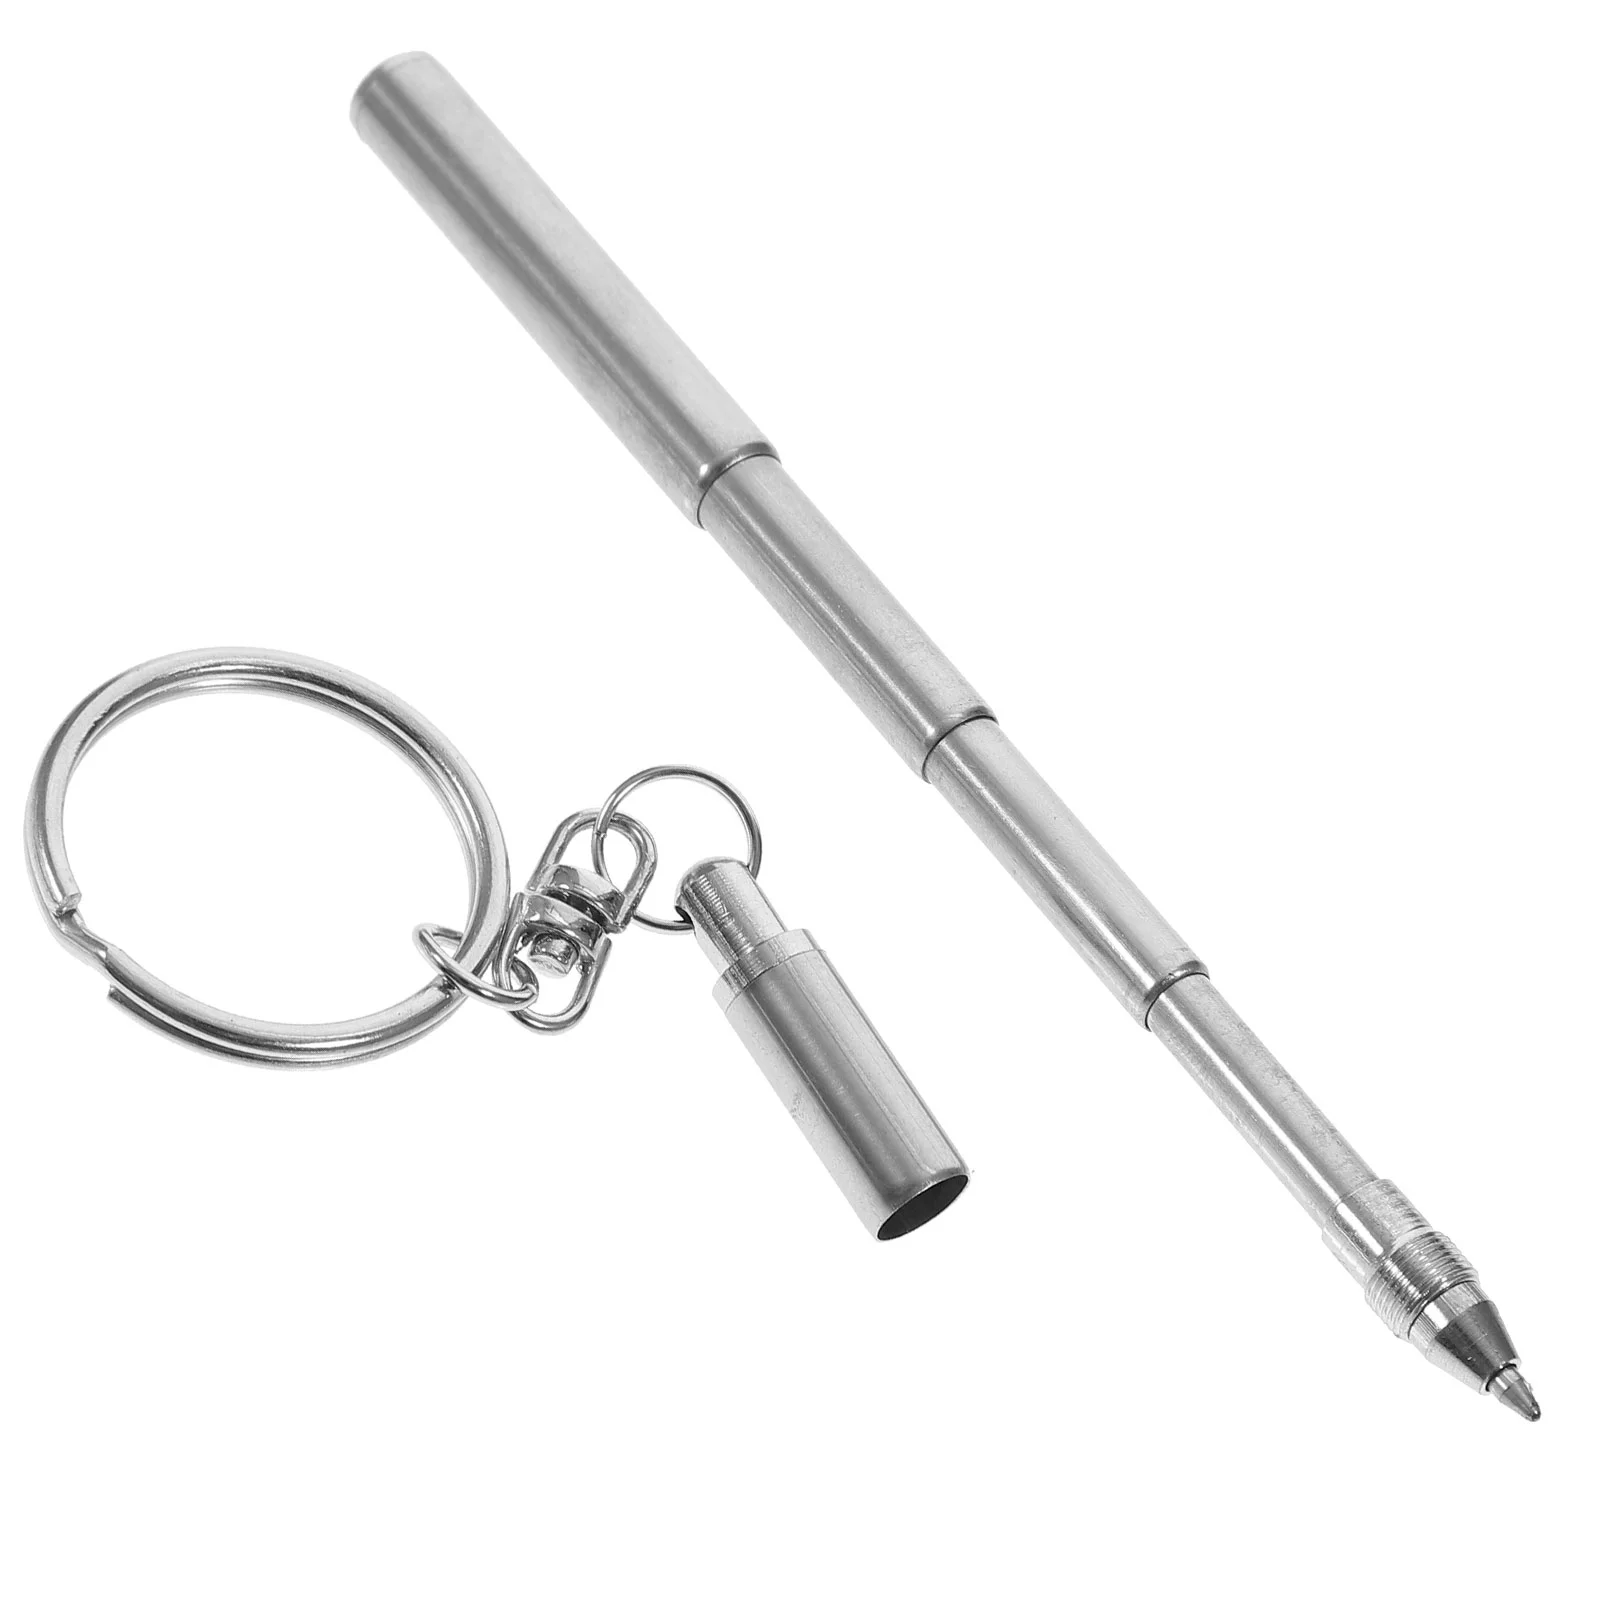 Retractable Pen Shape Keychain Mini Metal Key Ring Portable Stainless Steel Telescopic Ball Point Pens Black Keychain Tools mini blue tooth bt 5 3 phone selfie shutter remote control ring wireless smart remote controller page turner for ios android